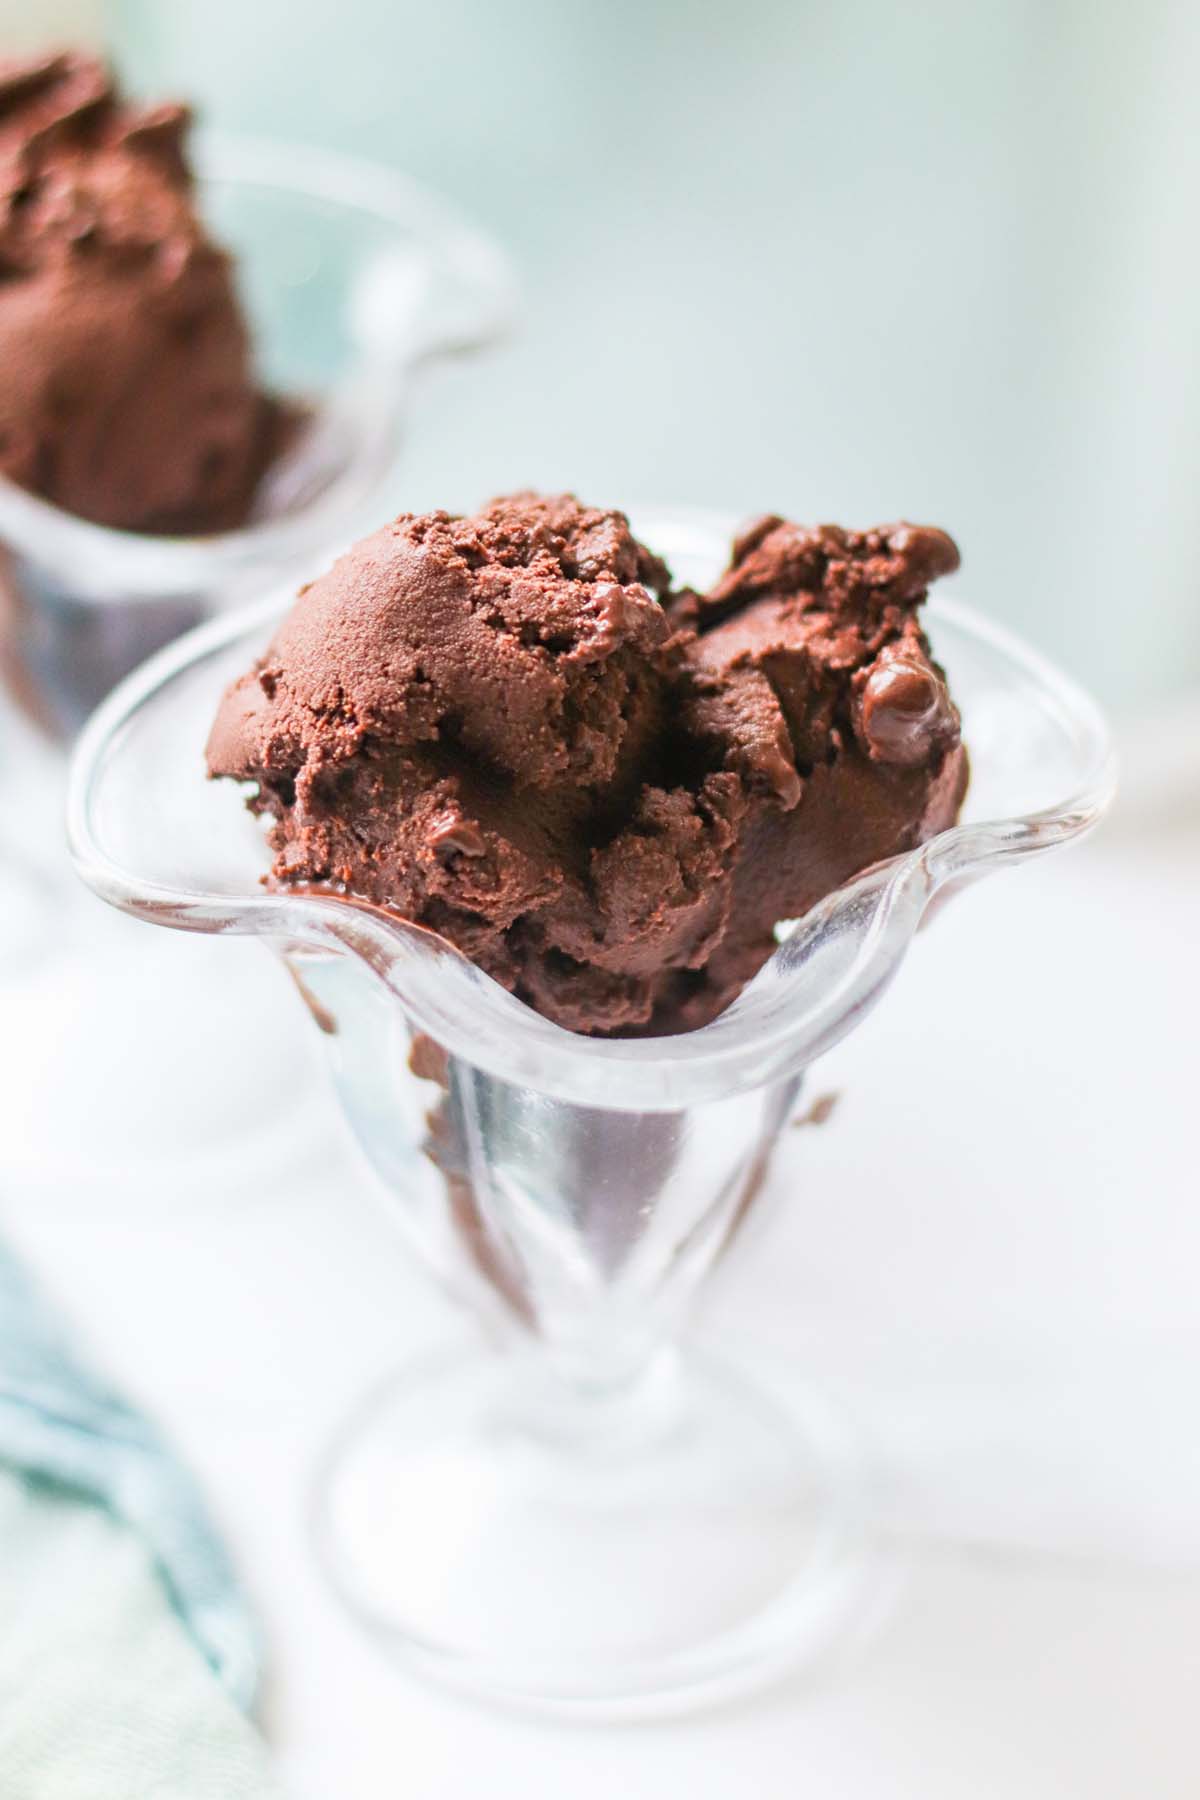 scoops of chocolate sorbet in a glass dish.